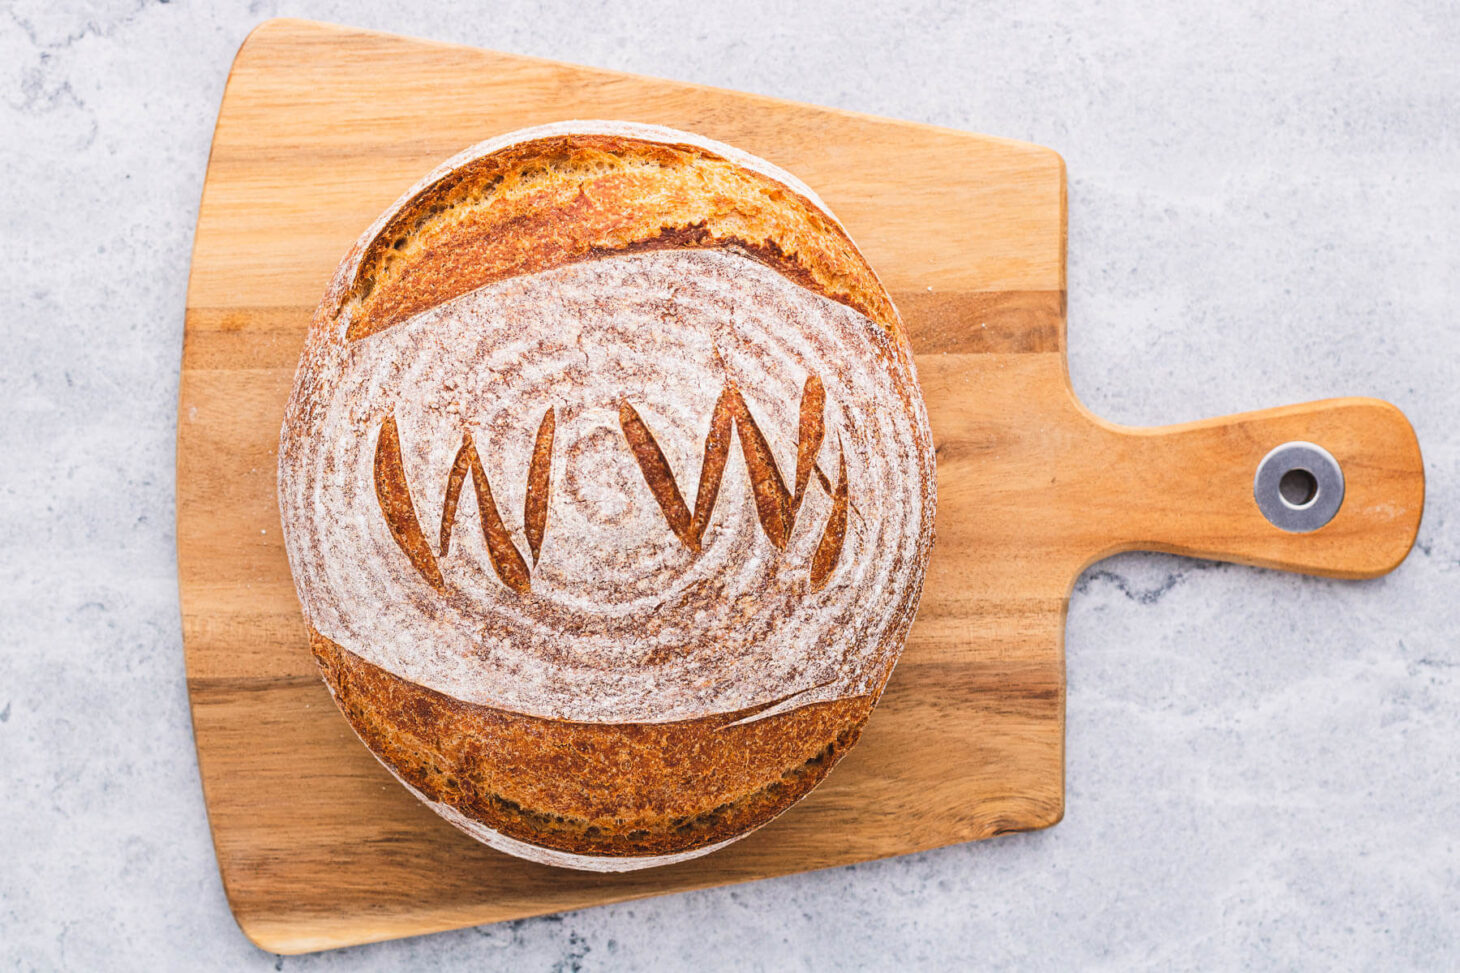 A boule of No Knead Whole Wheat Bread marked with WW scoring pattern on a wooden cutting board.